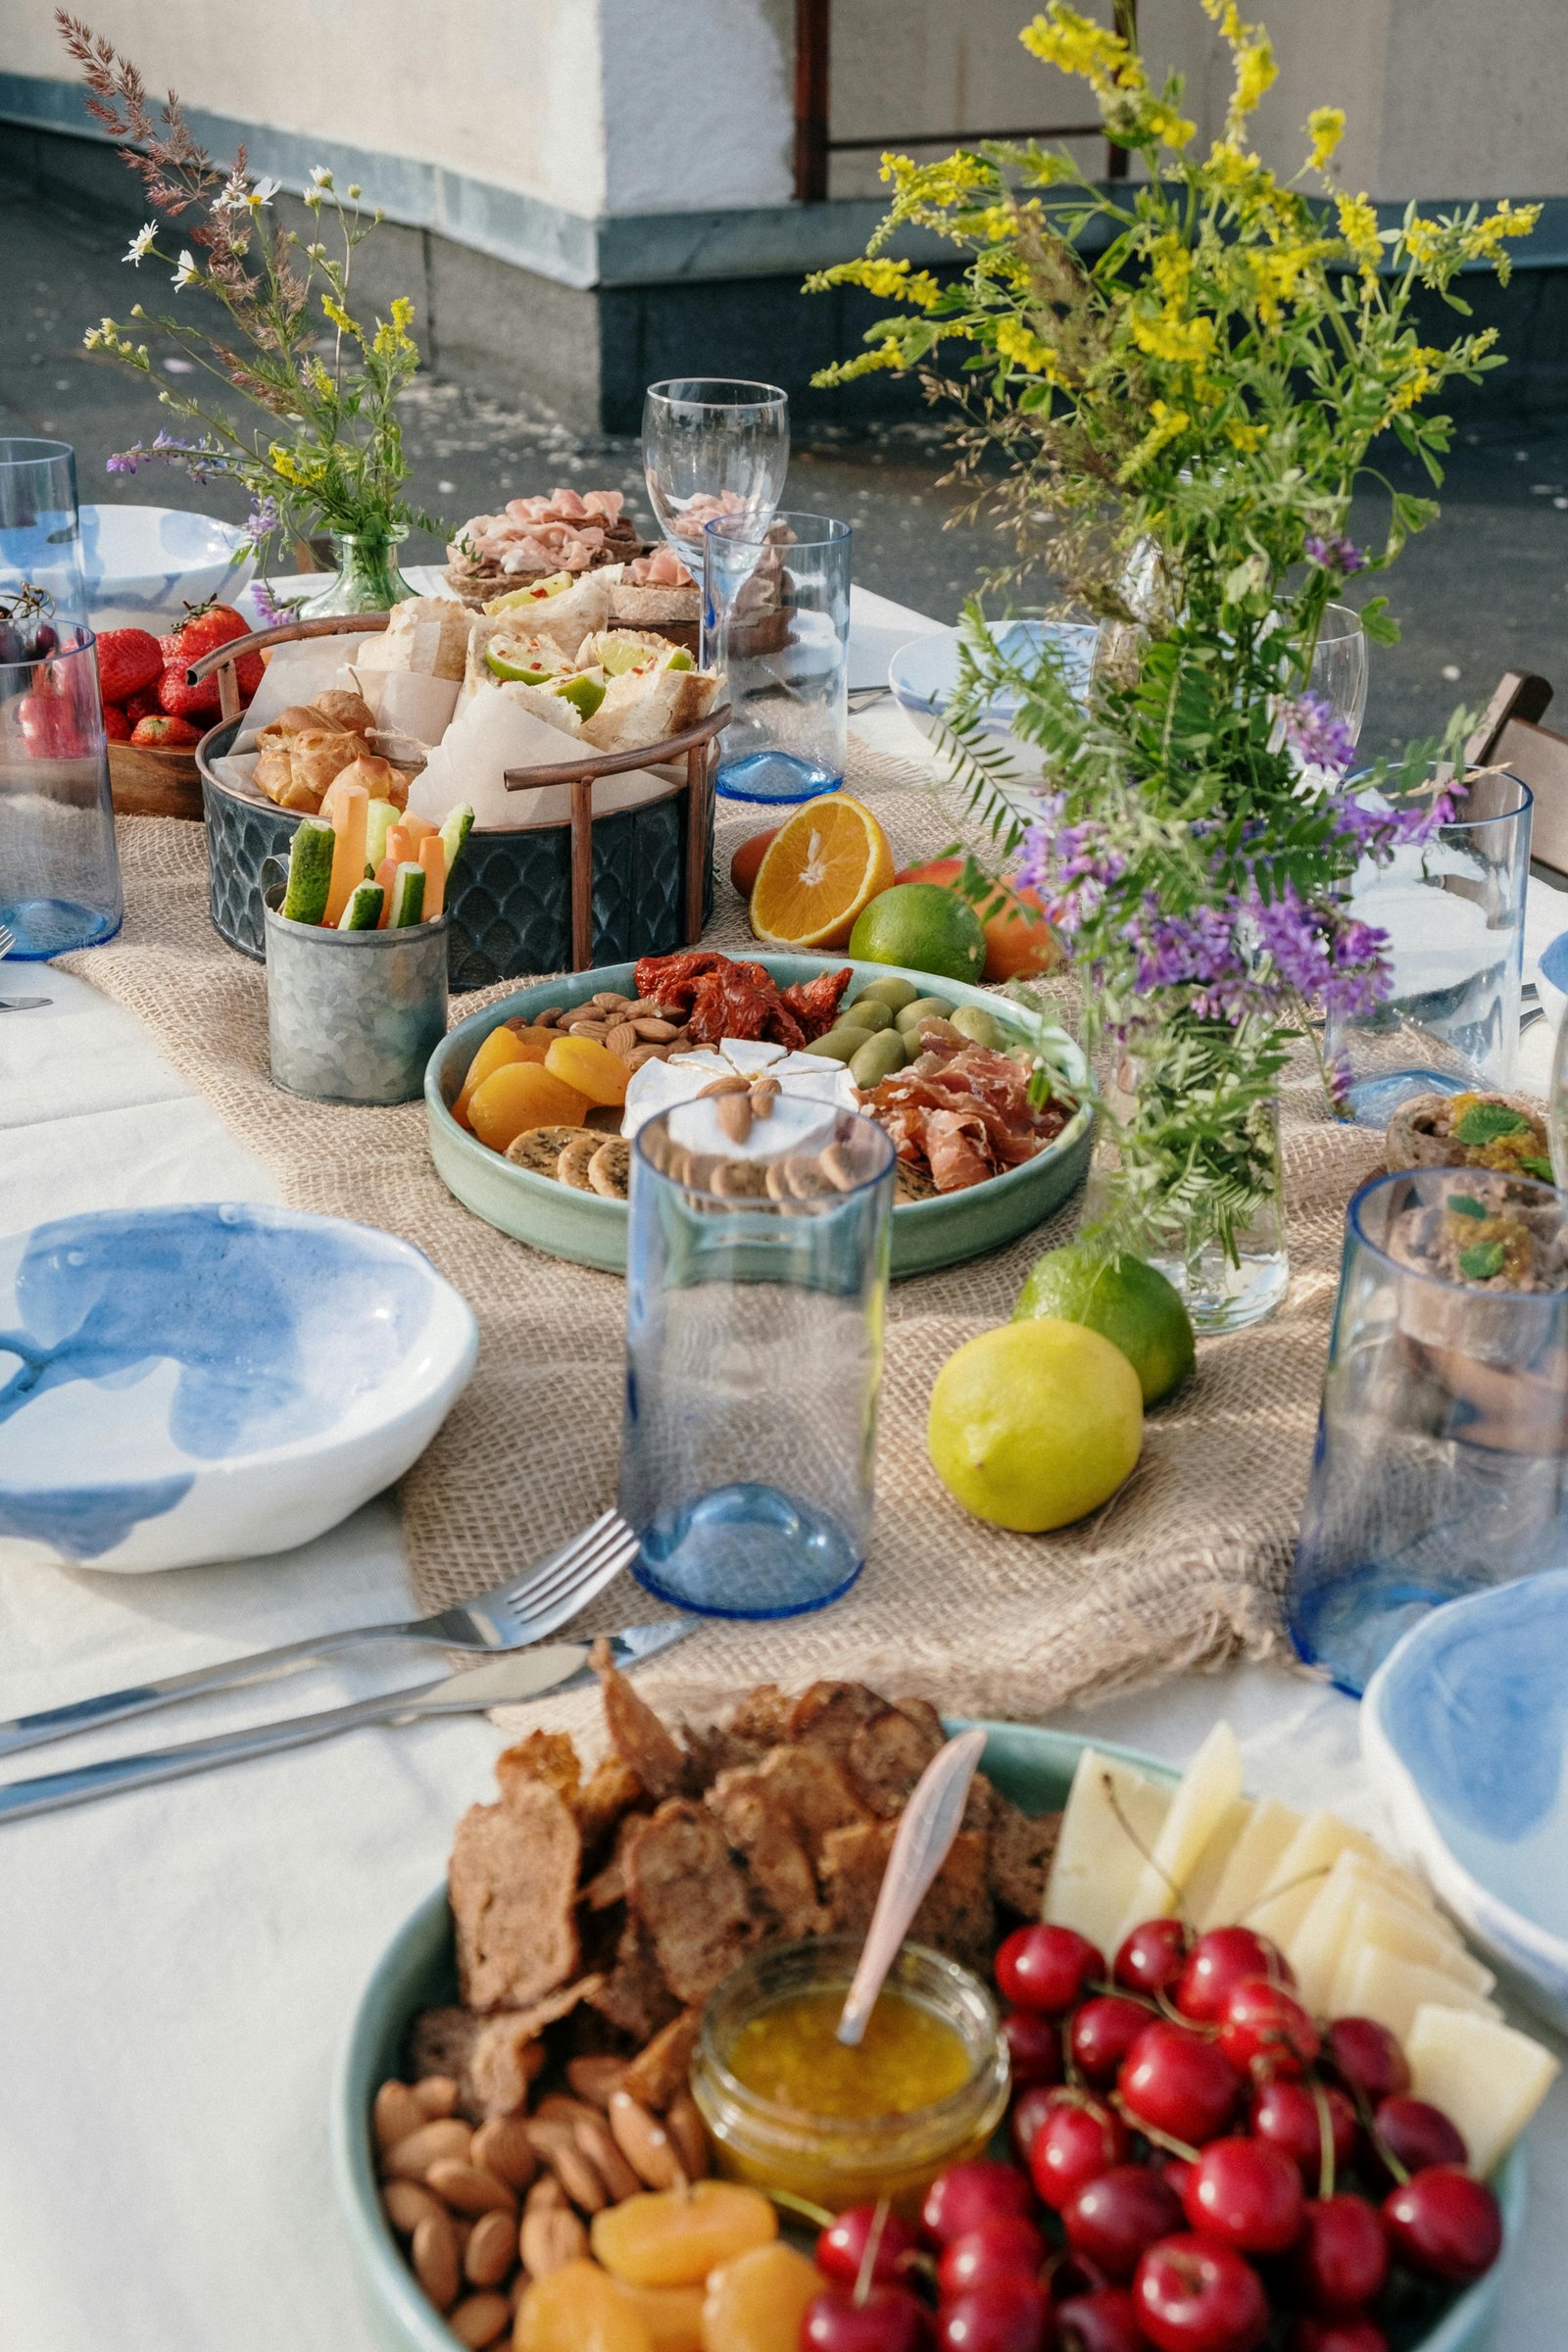 A table prepared for brunch | Source: Pexels